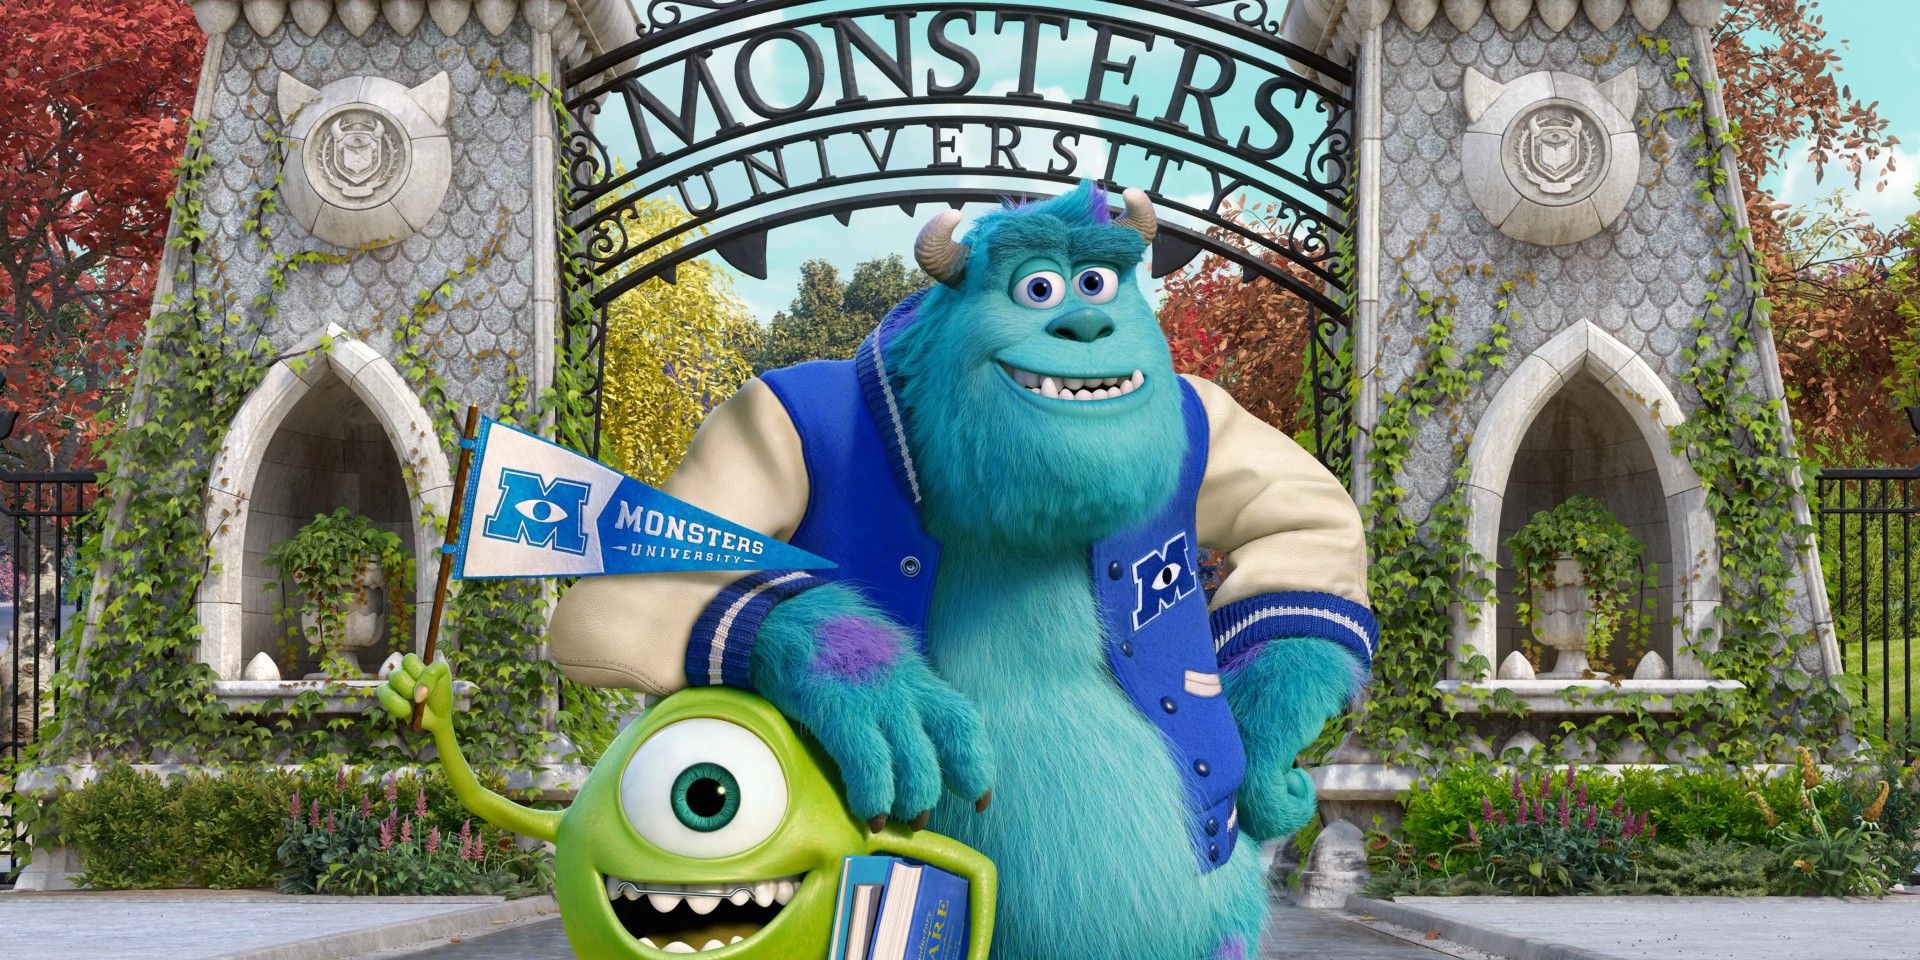 Mike and Sully stand outside of Monsters University